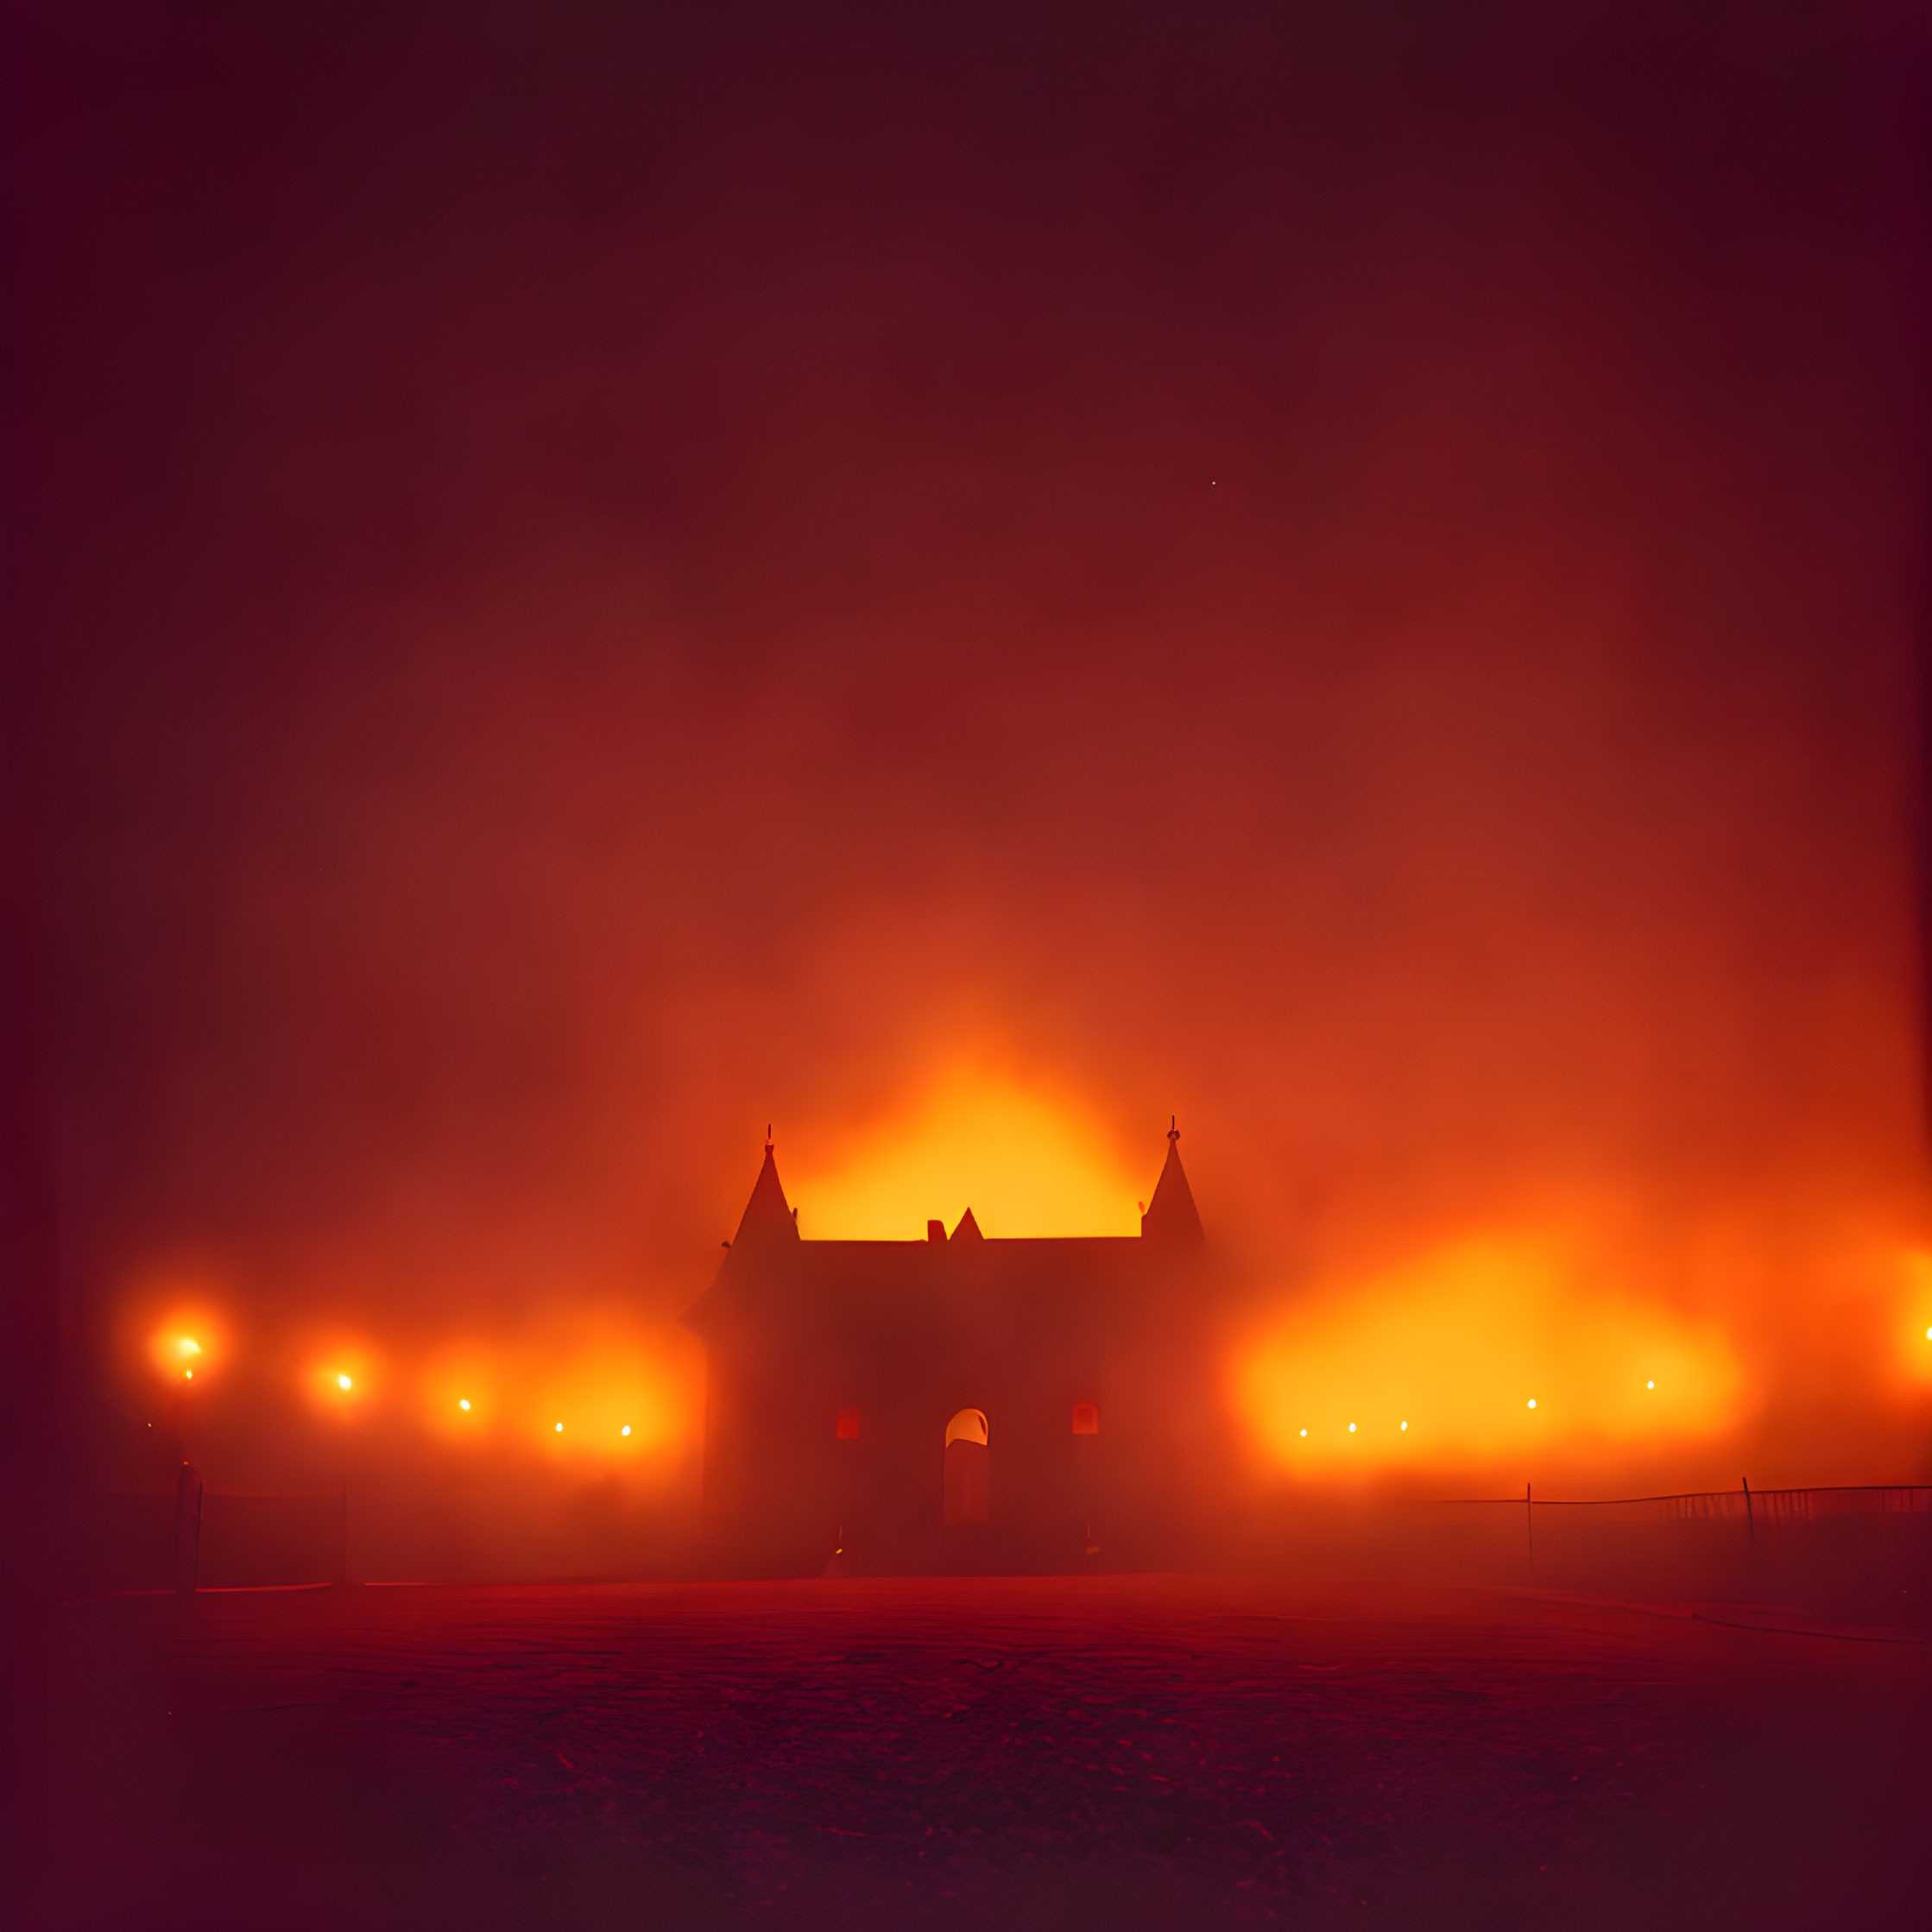 Misty red night scene with castle silhouette